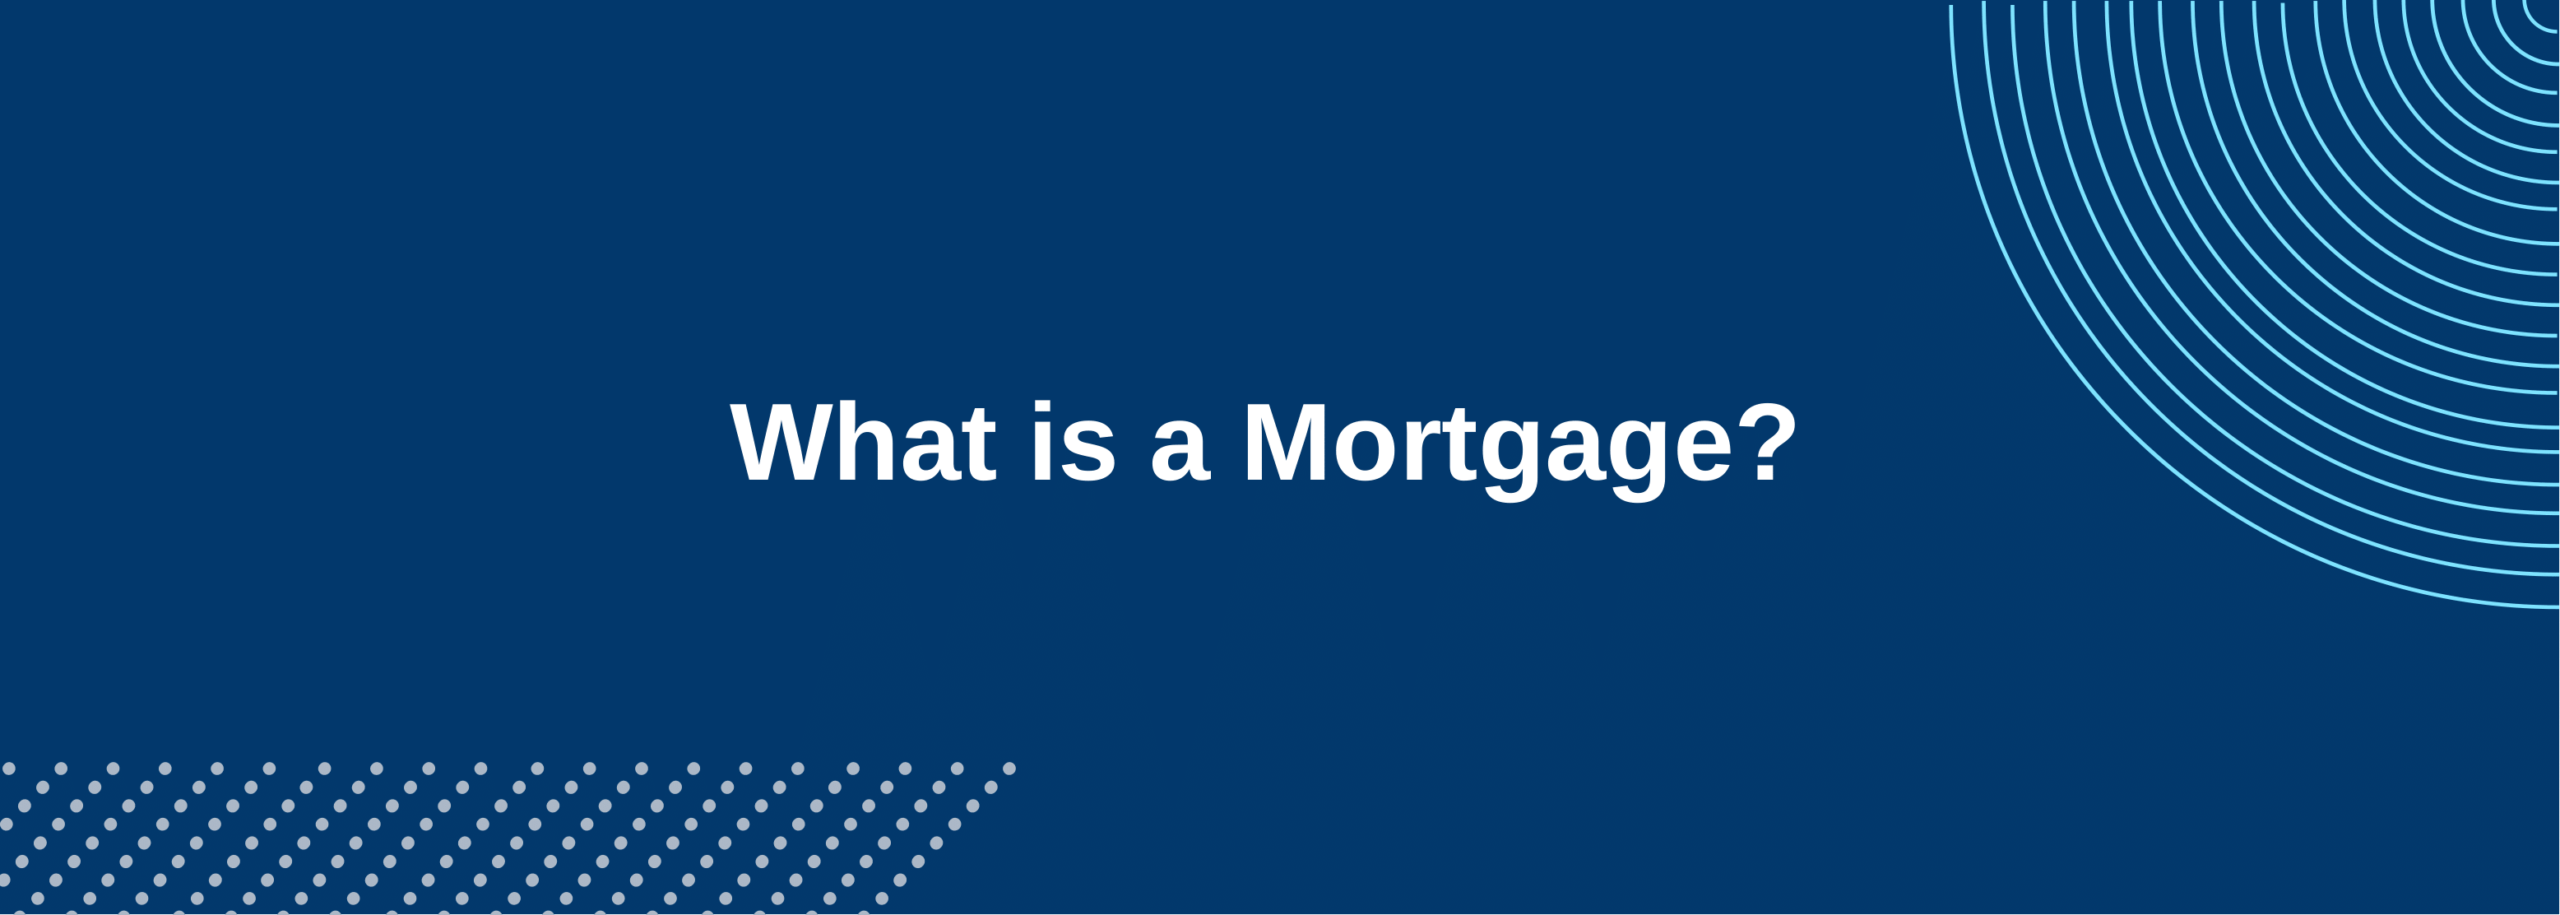 According to Investopedia, “mortgage is a type of loan used to purchase or maintain a home, land, or other types of real estate.”